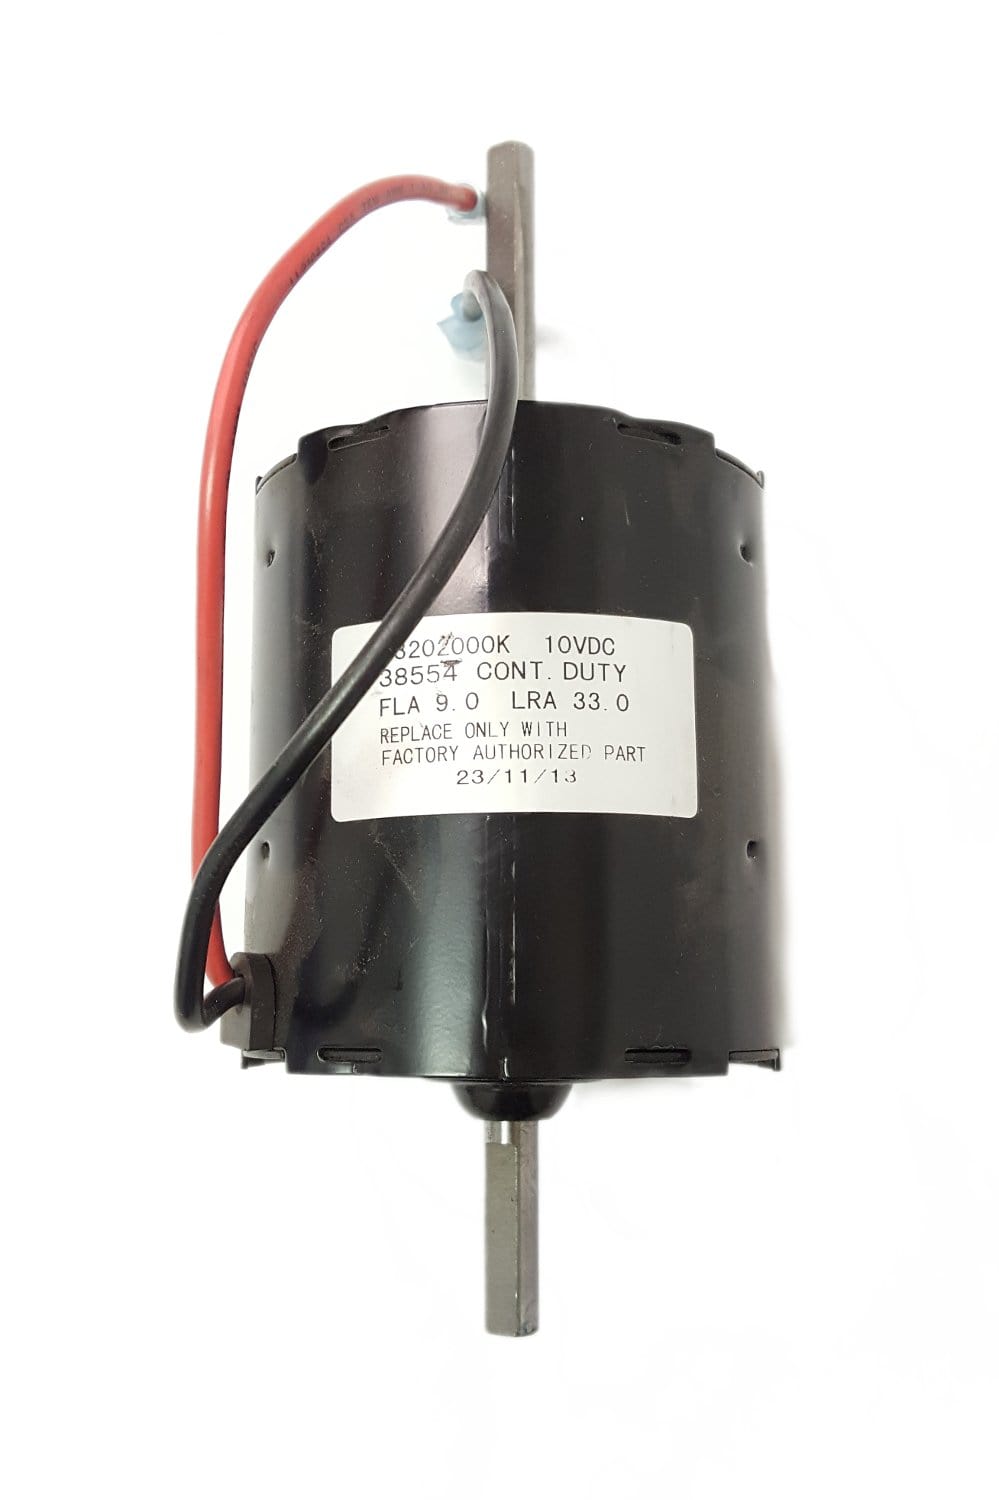 Atwood 38554 Two Stage Hydro Flame Furnace Motor